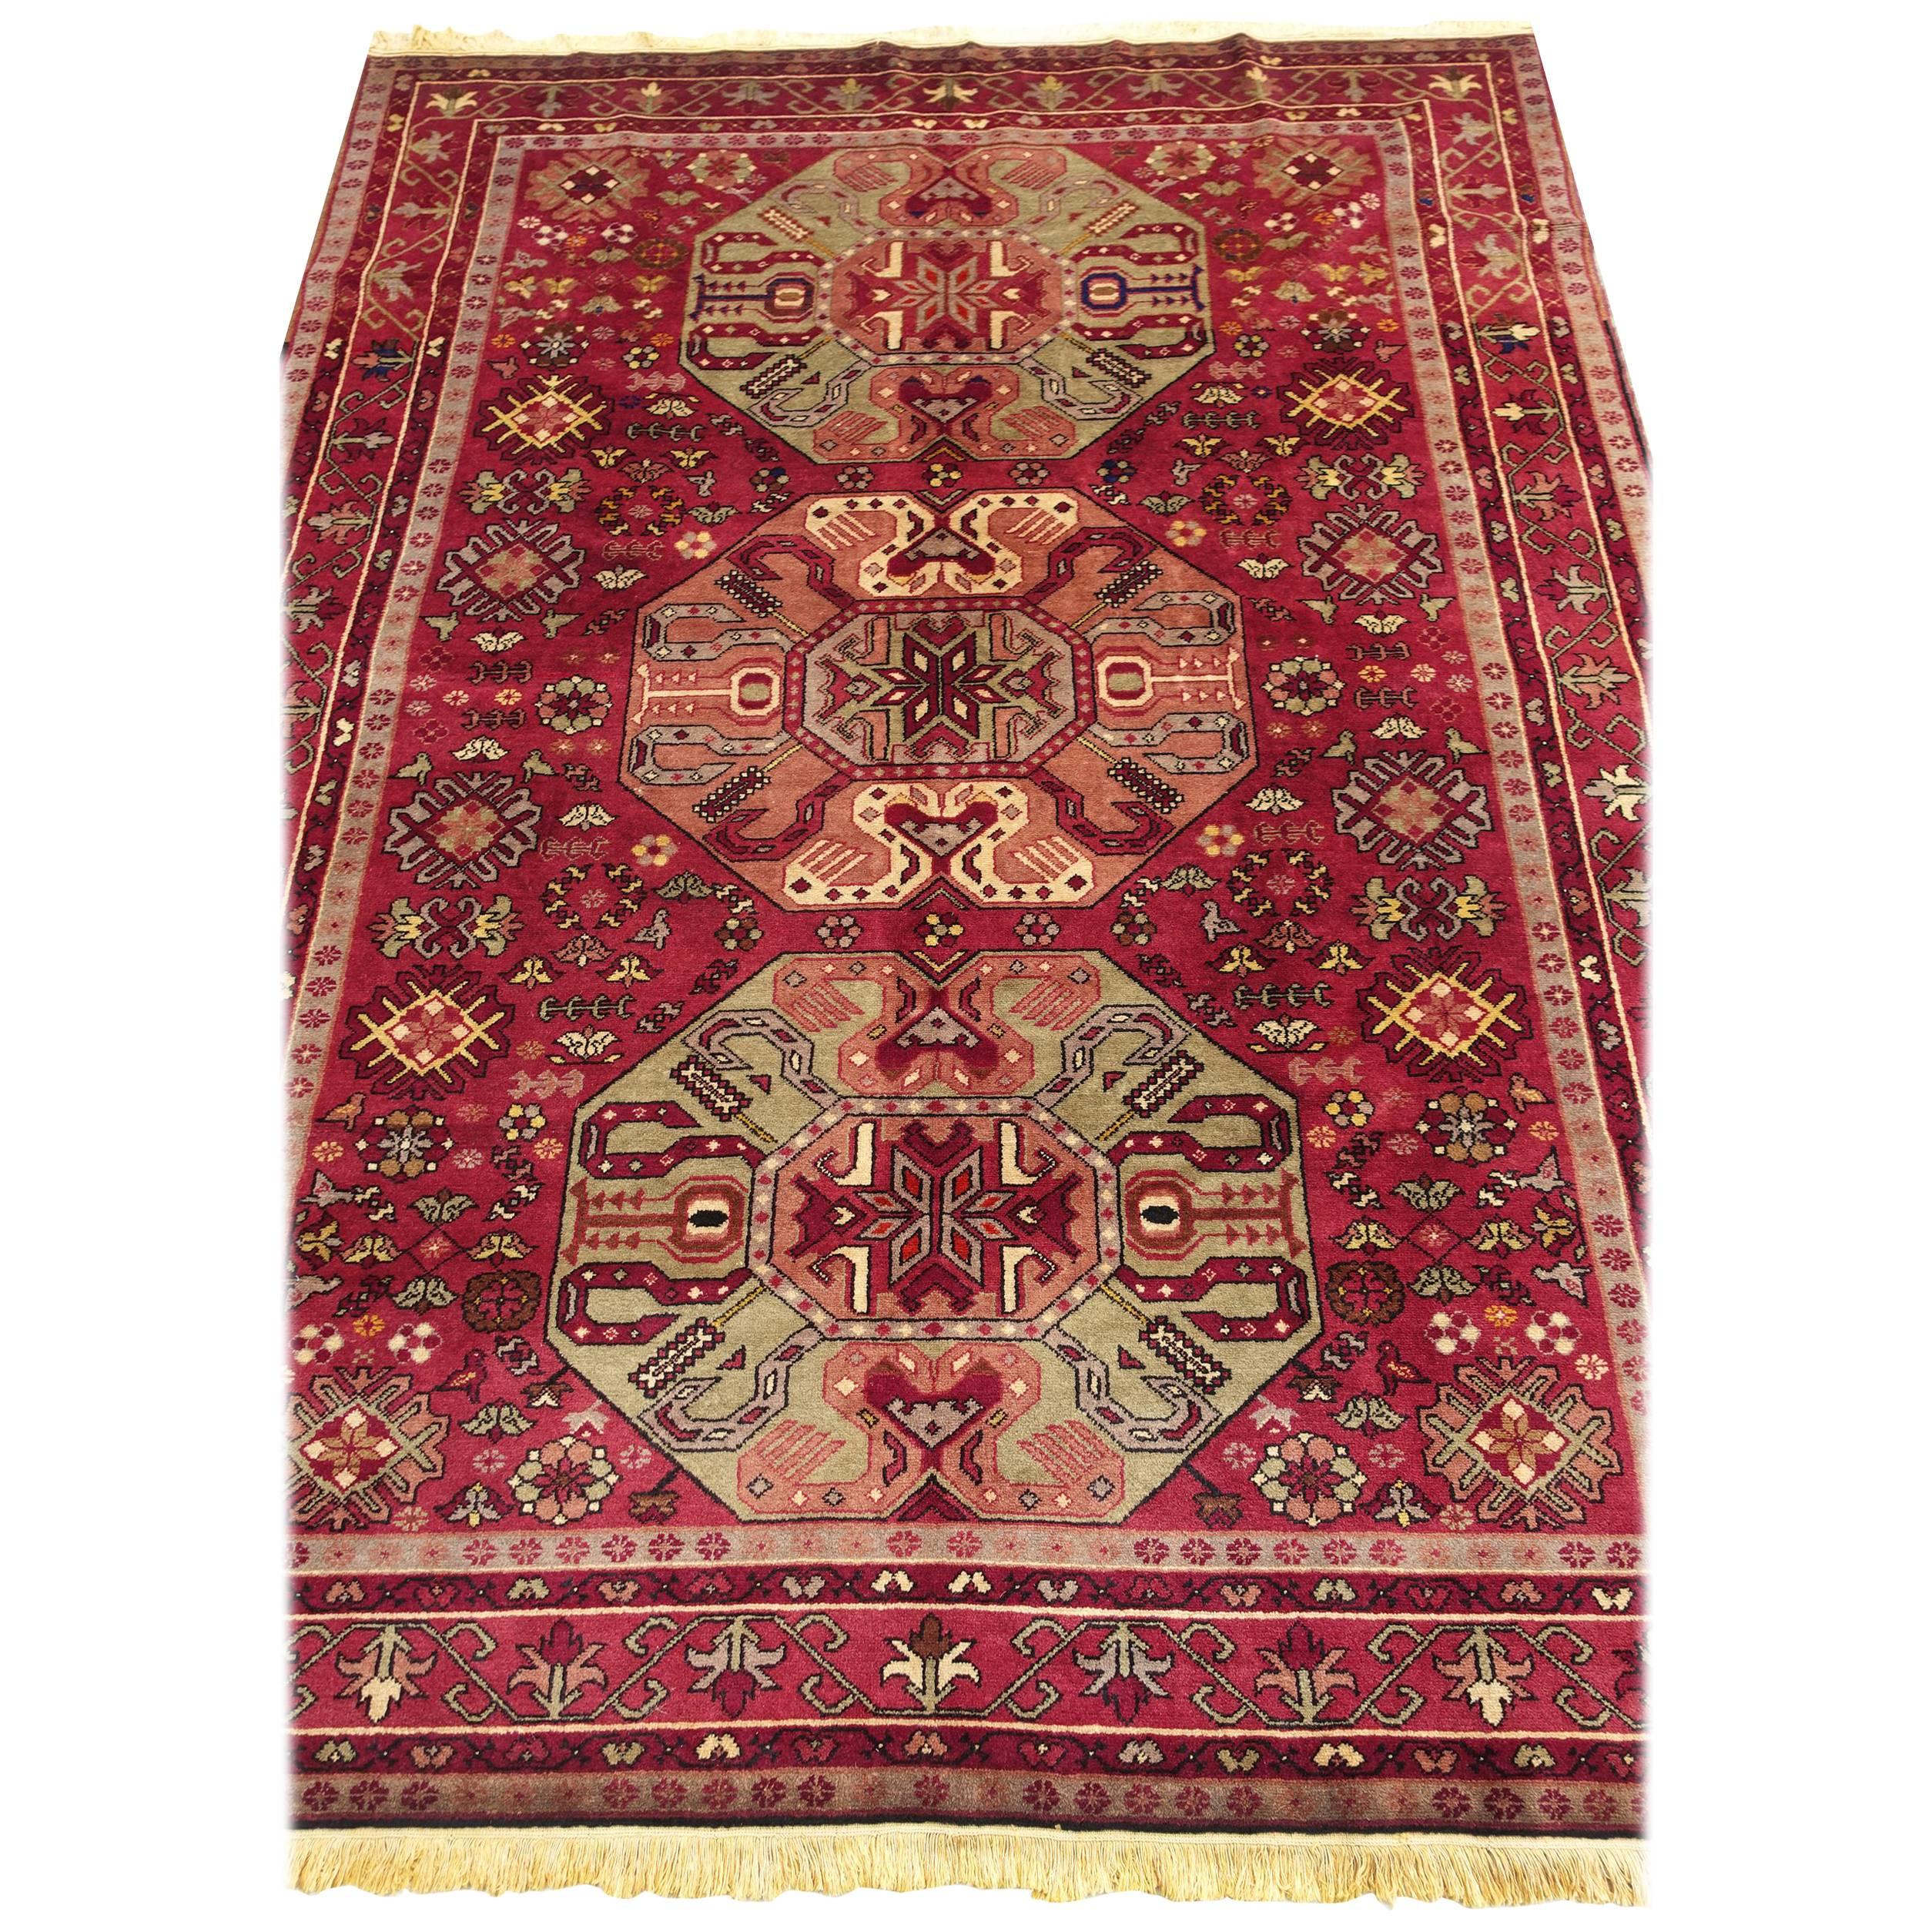 This is a beautiful Kazak rug from Armenia dating back to mid- or second half of the 20th century. It is a very fine rug in wool on rusty cotton foundation.
Stylistically, it is a Kazak emulating the style of Armenian orphan rugs. The colors, the